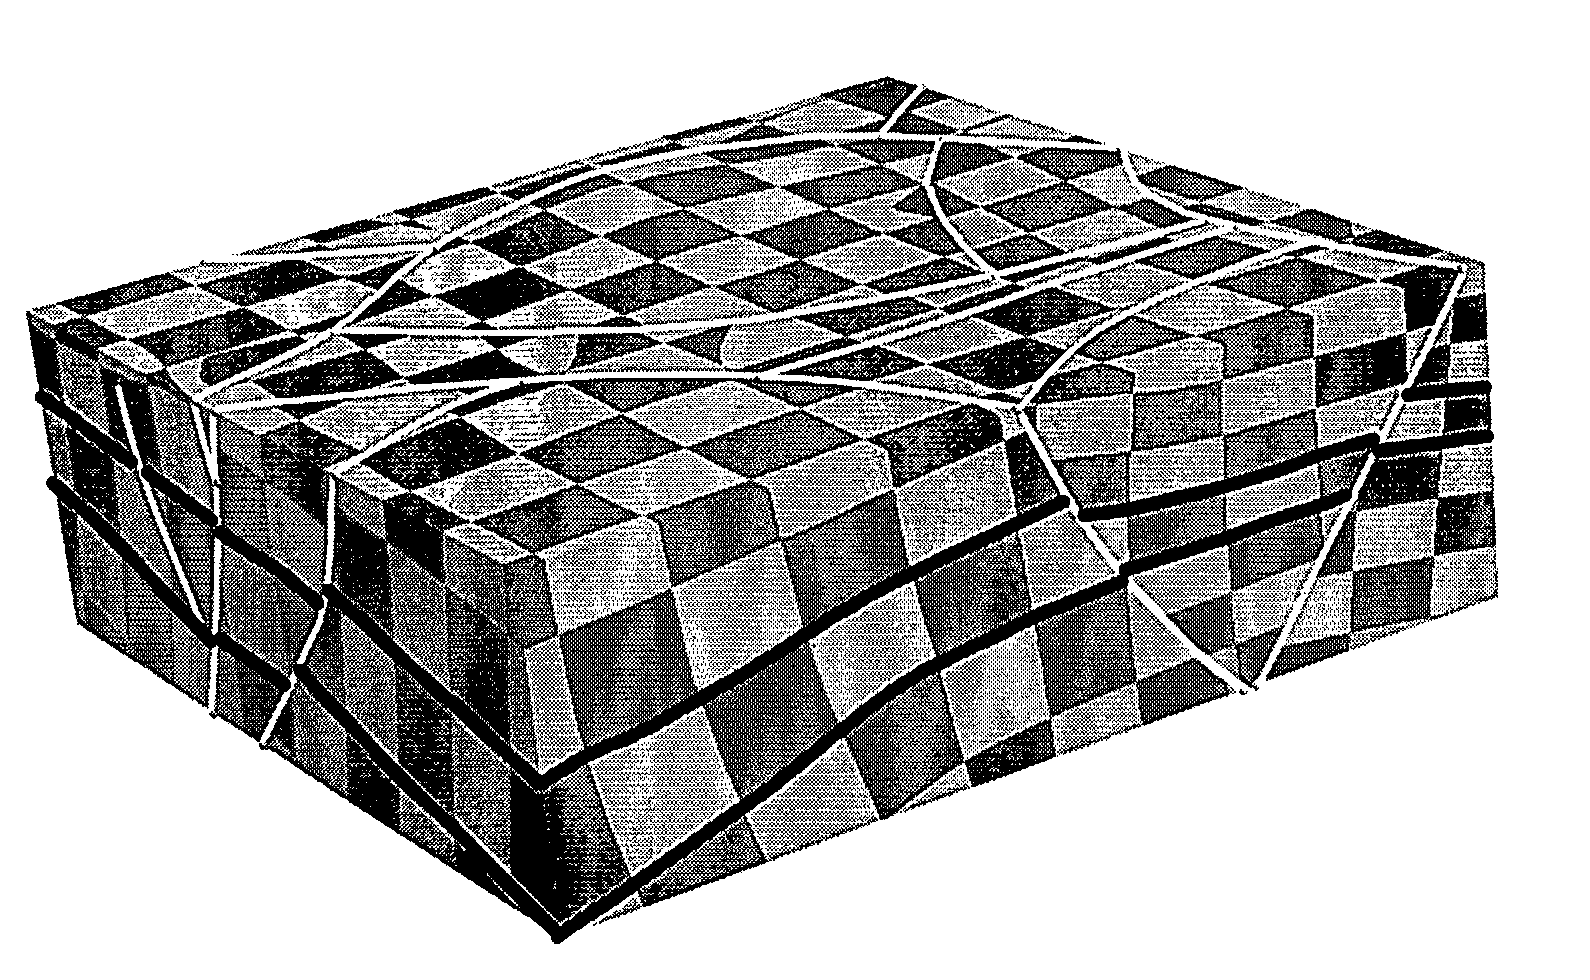 Method for building a three dimensional cellular partition of a geological domain